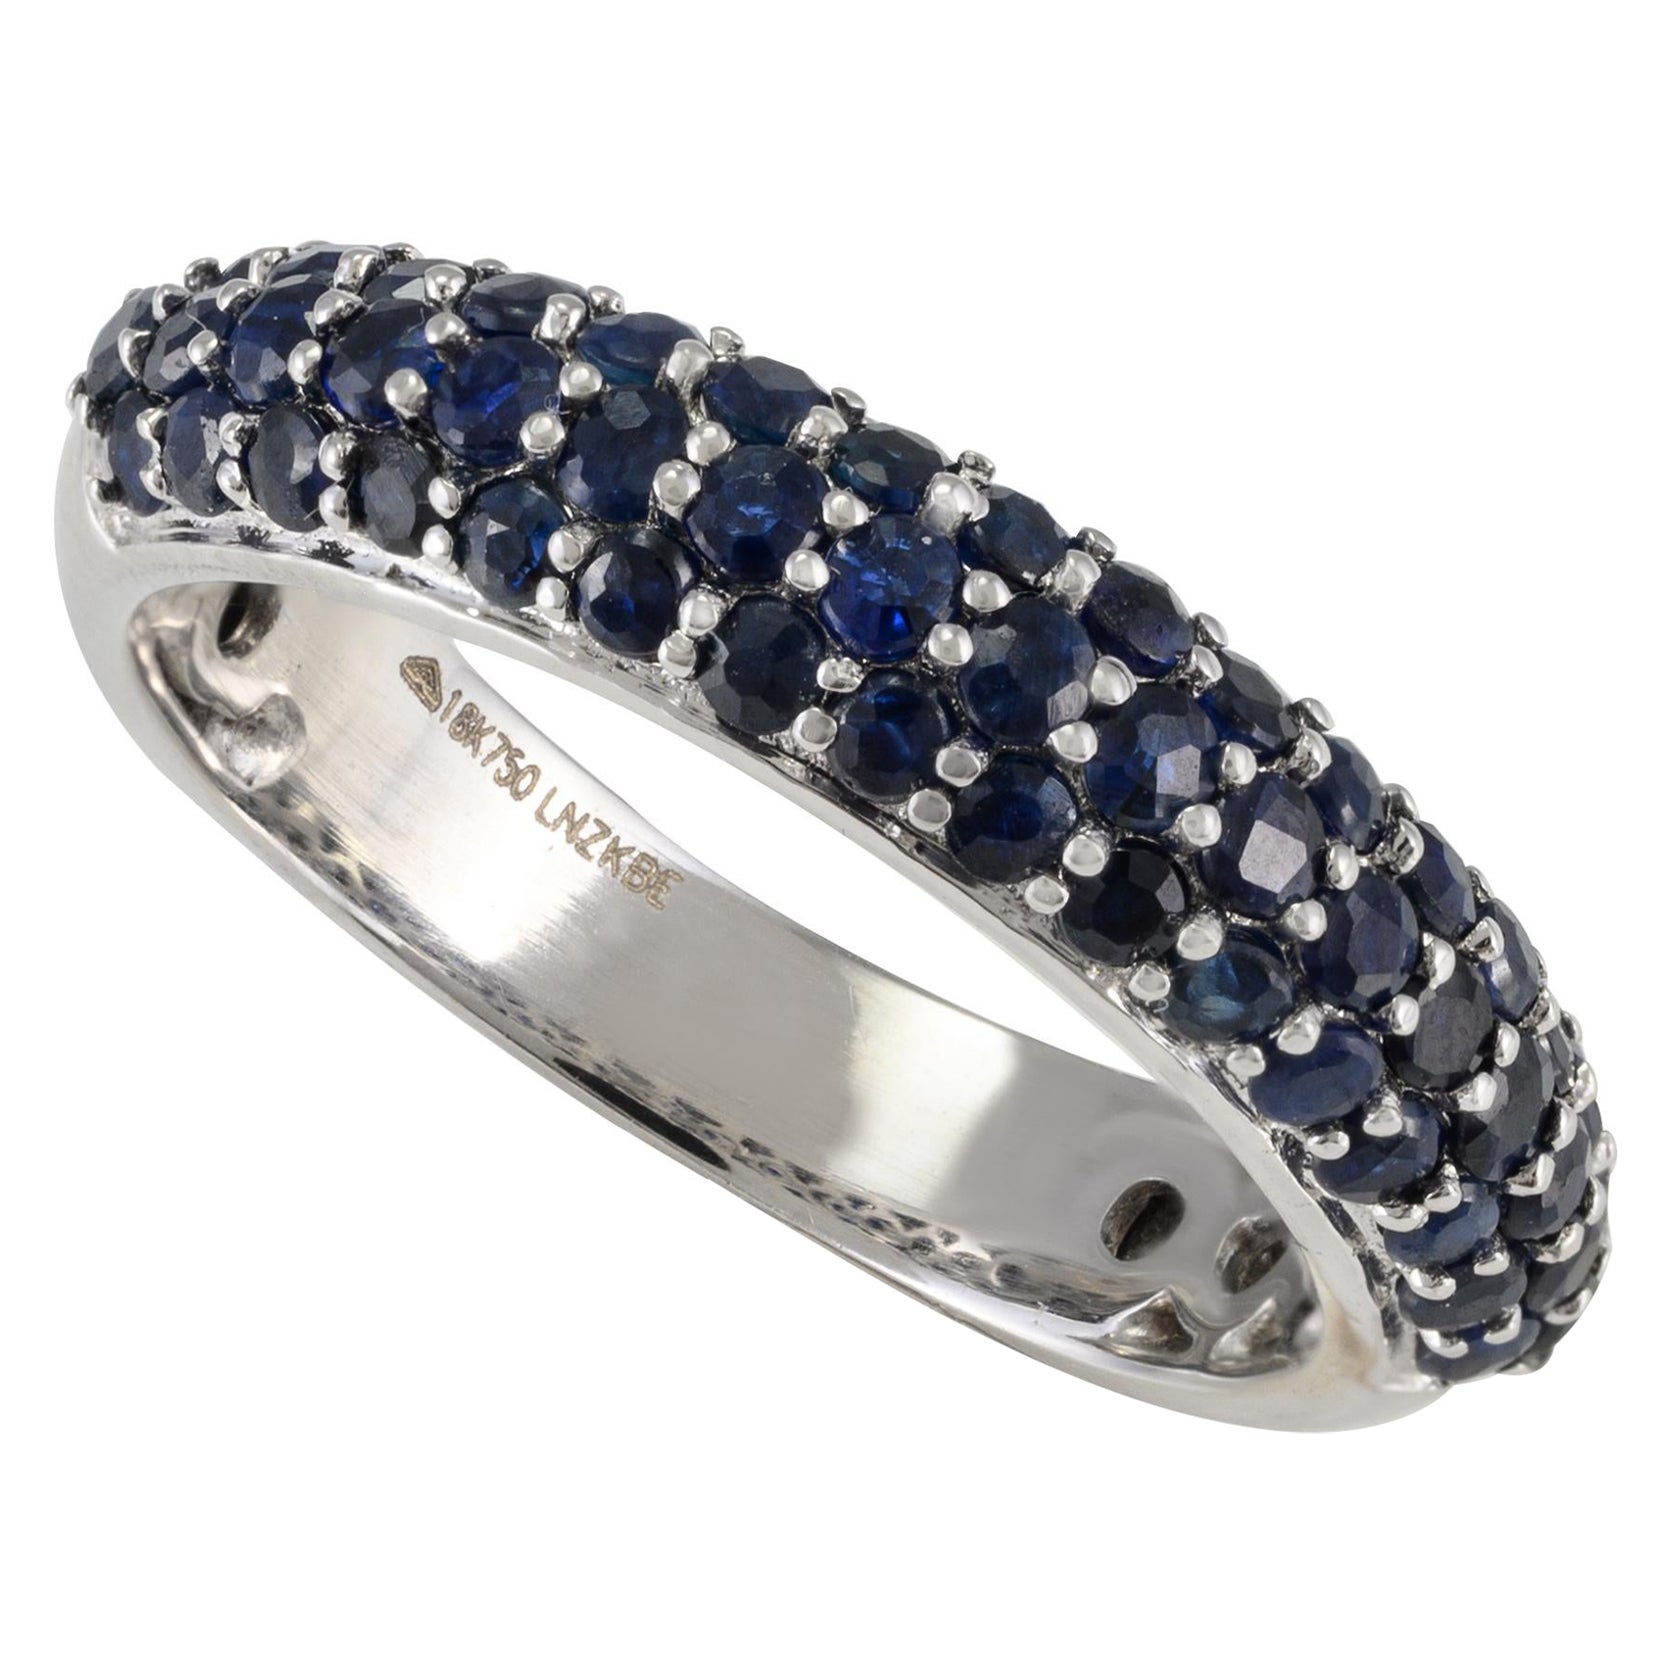 For Sale:  18k Solid White Gold 1.3 Ct Pave Set Deep Blue Sapphire Dome Ring Eternity Band